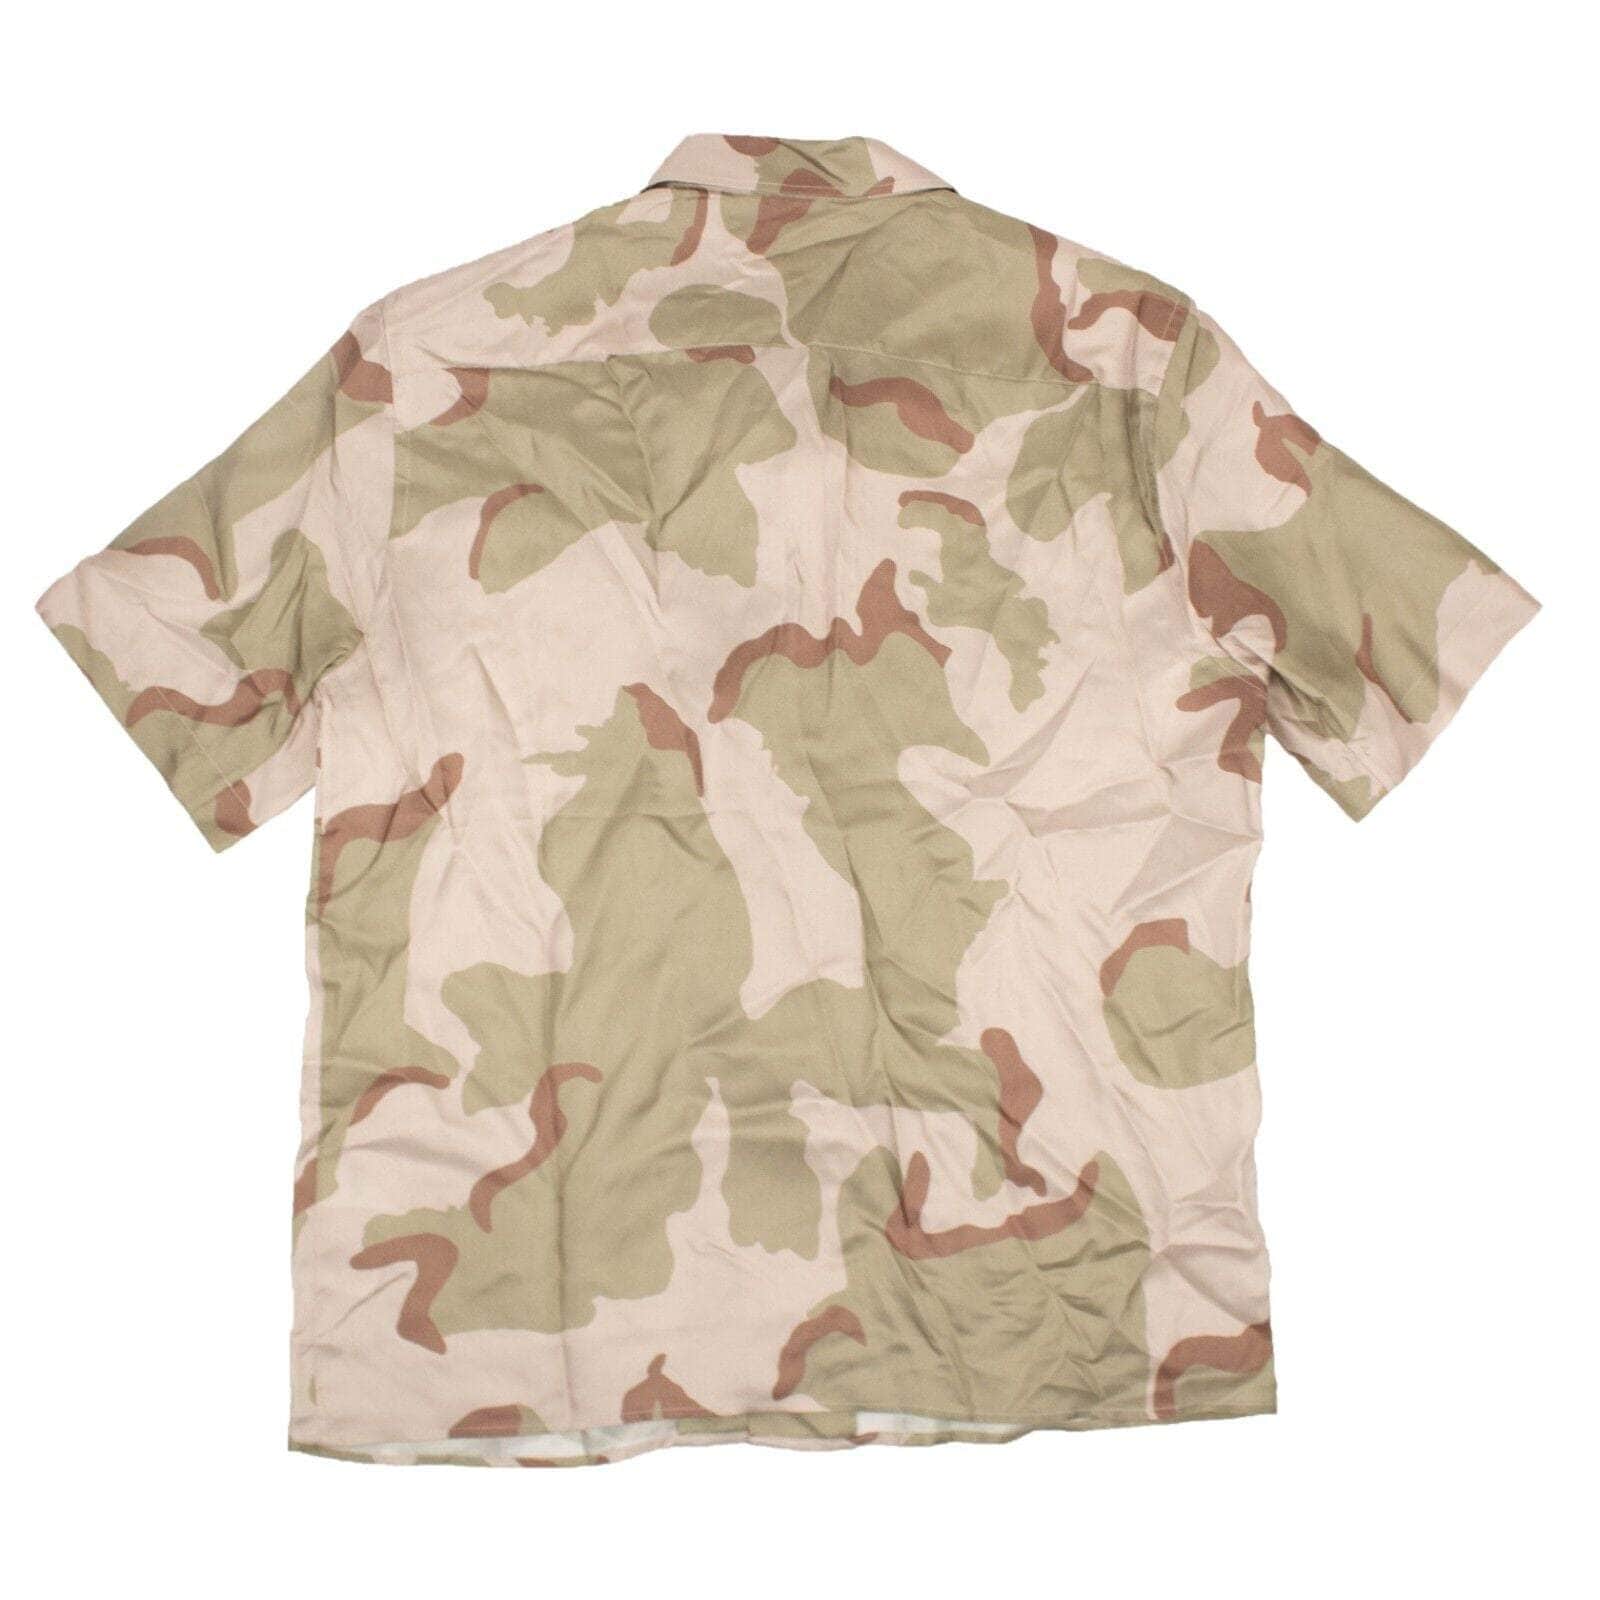 President's channelenable-all, chicmi, couponcollection, gender-mens, main-clothing, mens-shoes, MixedApparel, presidents, size-m, size-s, under-250 S Brown Camo Silk Rangi Button Down Shirt 95-PNT-1002/S 95-PNT-1002/S